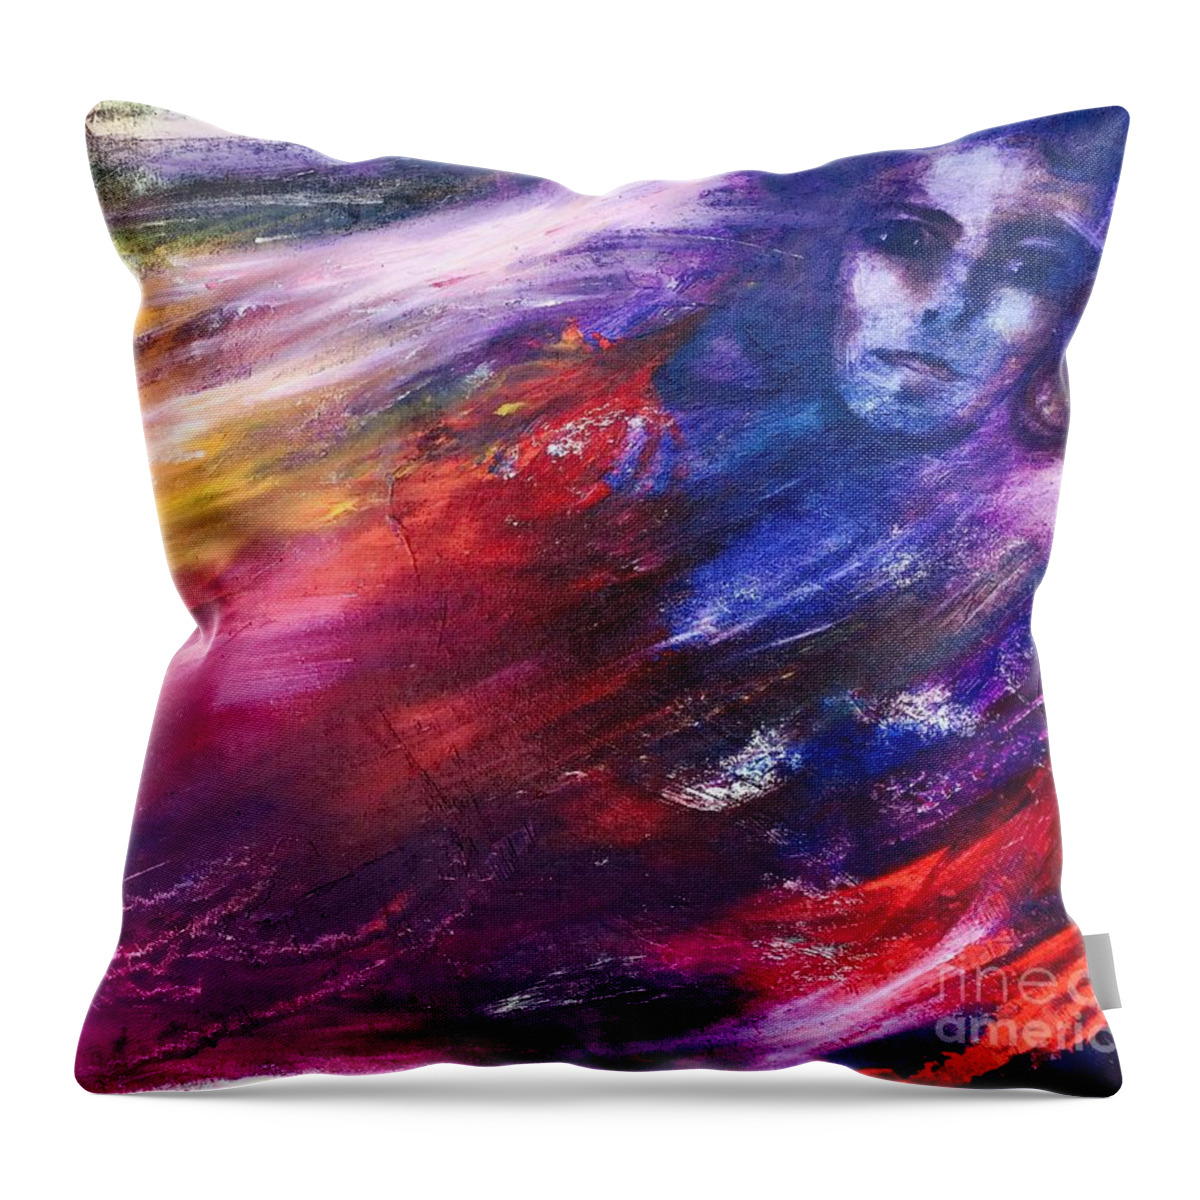 Wanderer Throw Pillow featuring the painting What Hides by Marat Essex